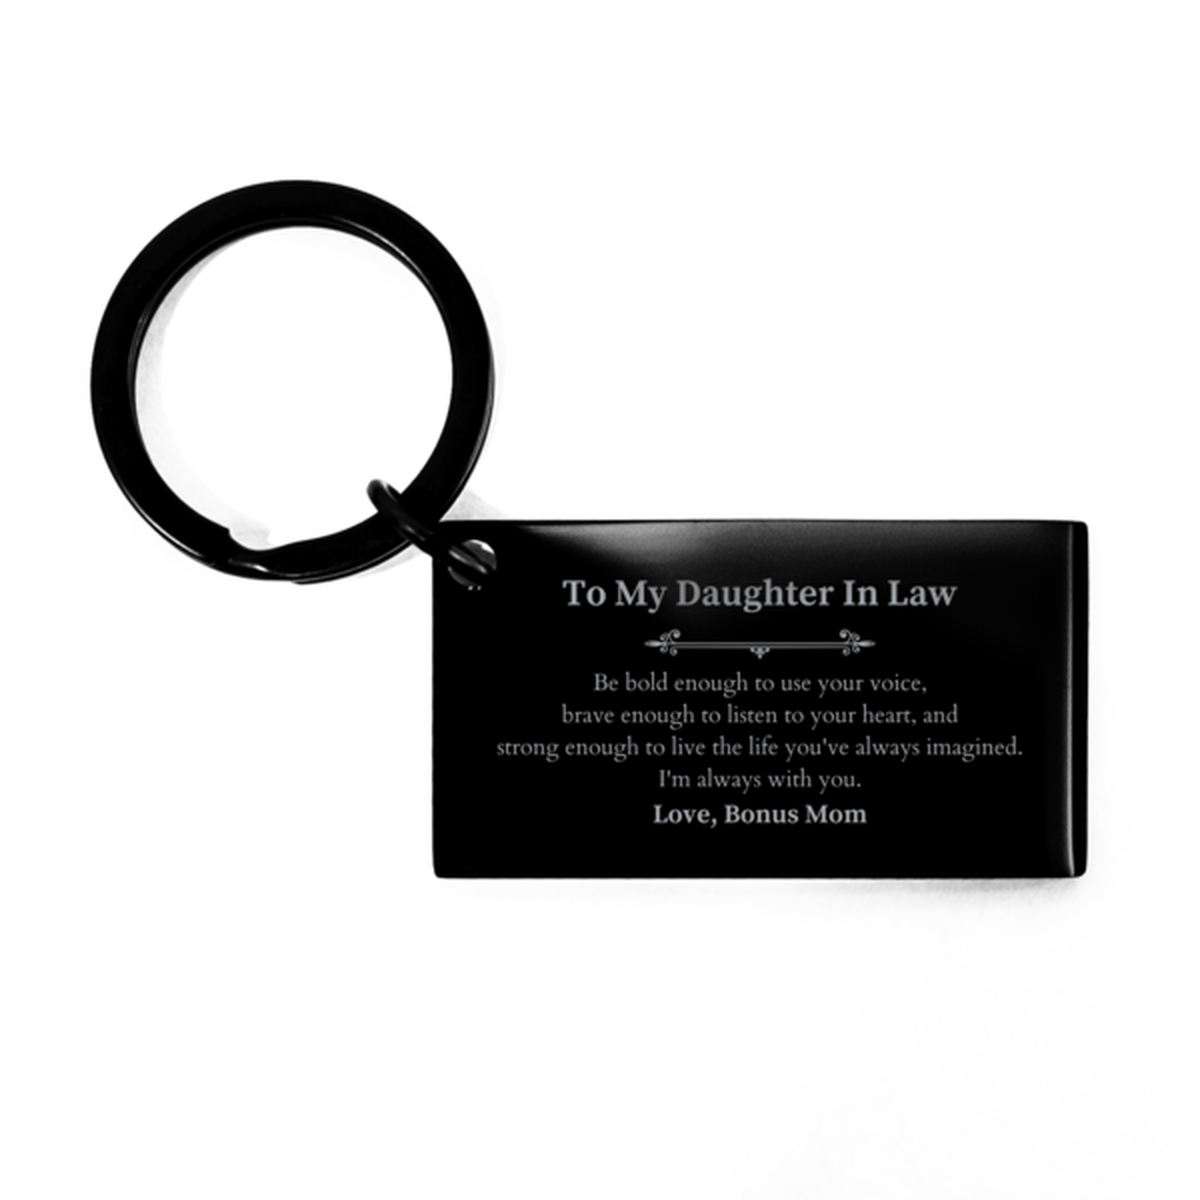 Keepsake Daughter In Law Keychain Gift Idea Graduation Christmas Birthday Daughter In Law from Bonus Mom, Daughter In Law Be bold enough to use your voice, brave enough to listen to your heart. Love, Bonus Mom